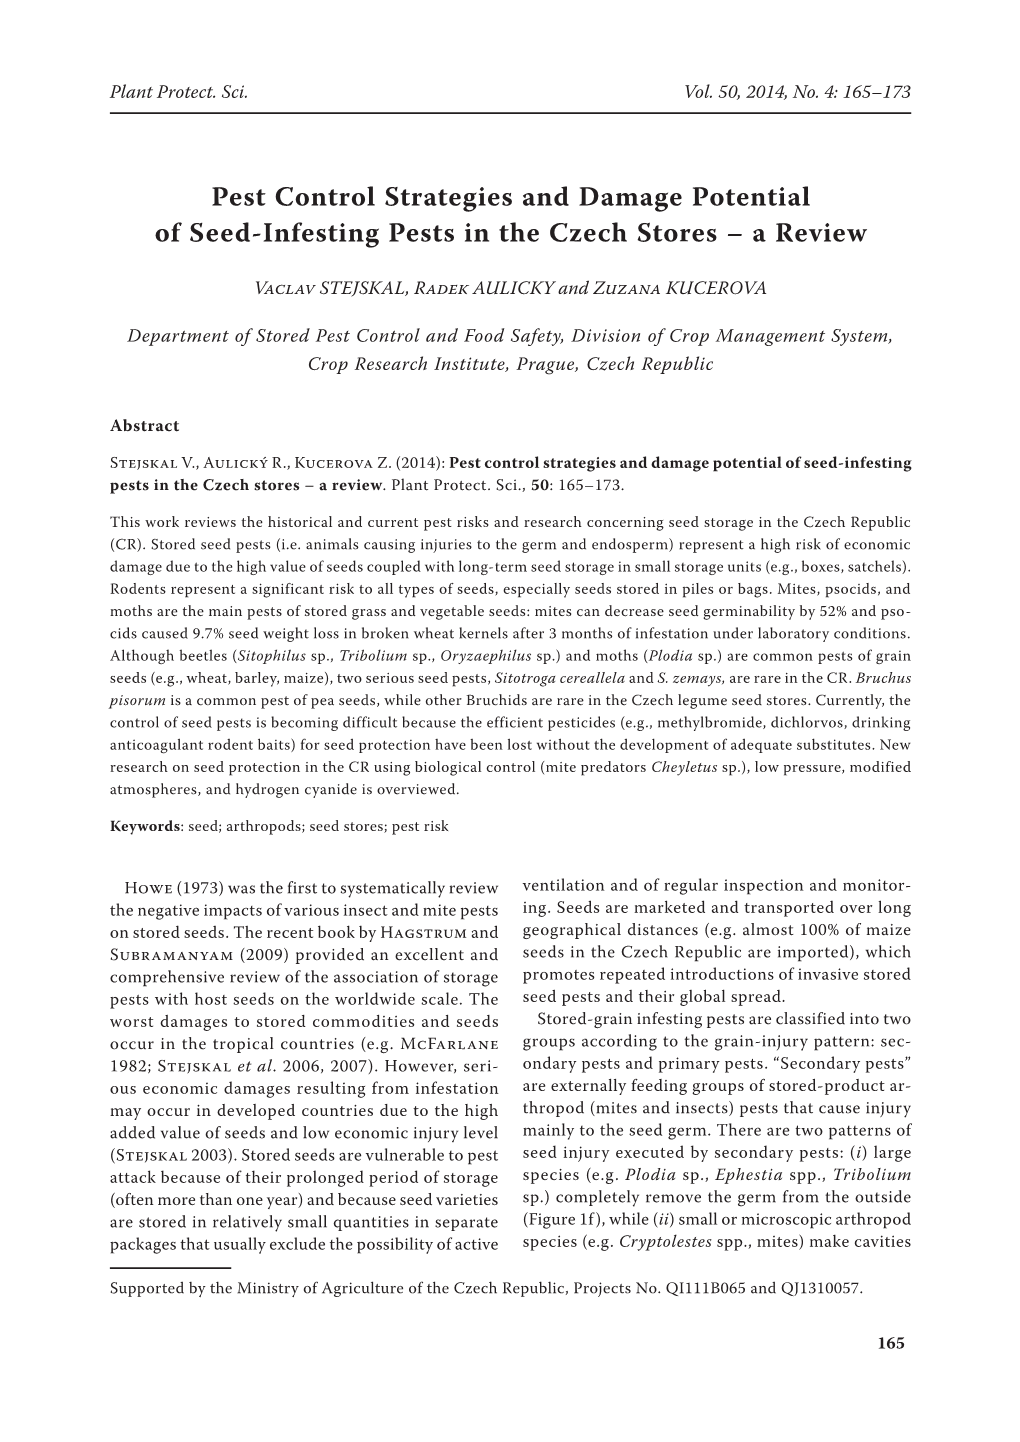 Pest Control Strategies and Damage Potential of Seed-Infesting Pests in the Czech Stores – a Review